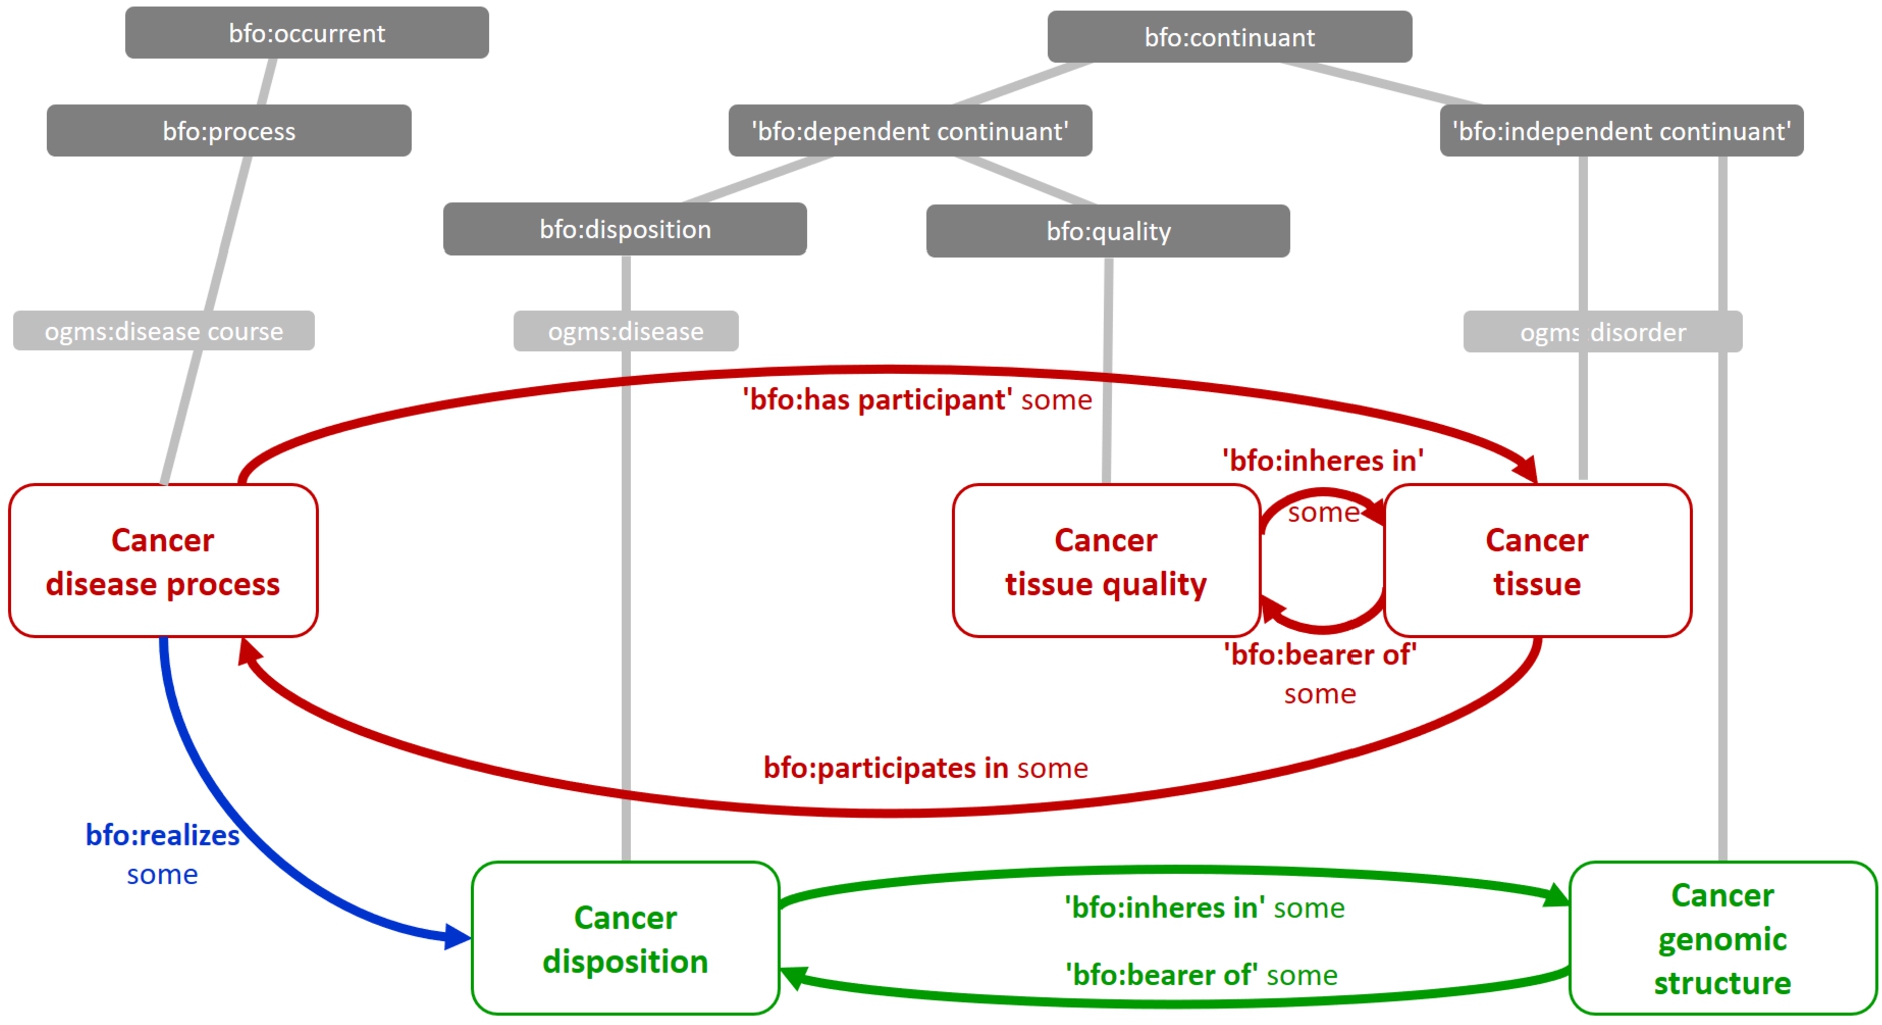 The conceptual space of Clinical Findings (CFs) in the context of BFO. The example shows different entity types involved, typed by their BFO upper-level categories and OGMS (Ontology of General Medical Science) classes (Scheuermann et al., 2009). “Cancer genomic structure” relates to the germline genomic structure underlying a disposition for malignant growth.